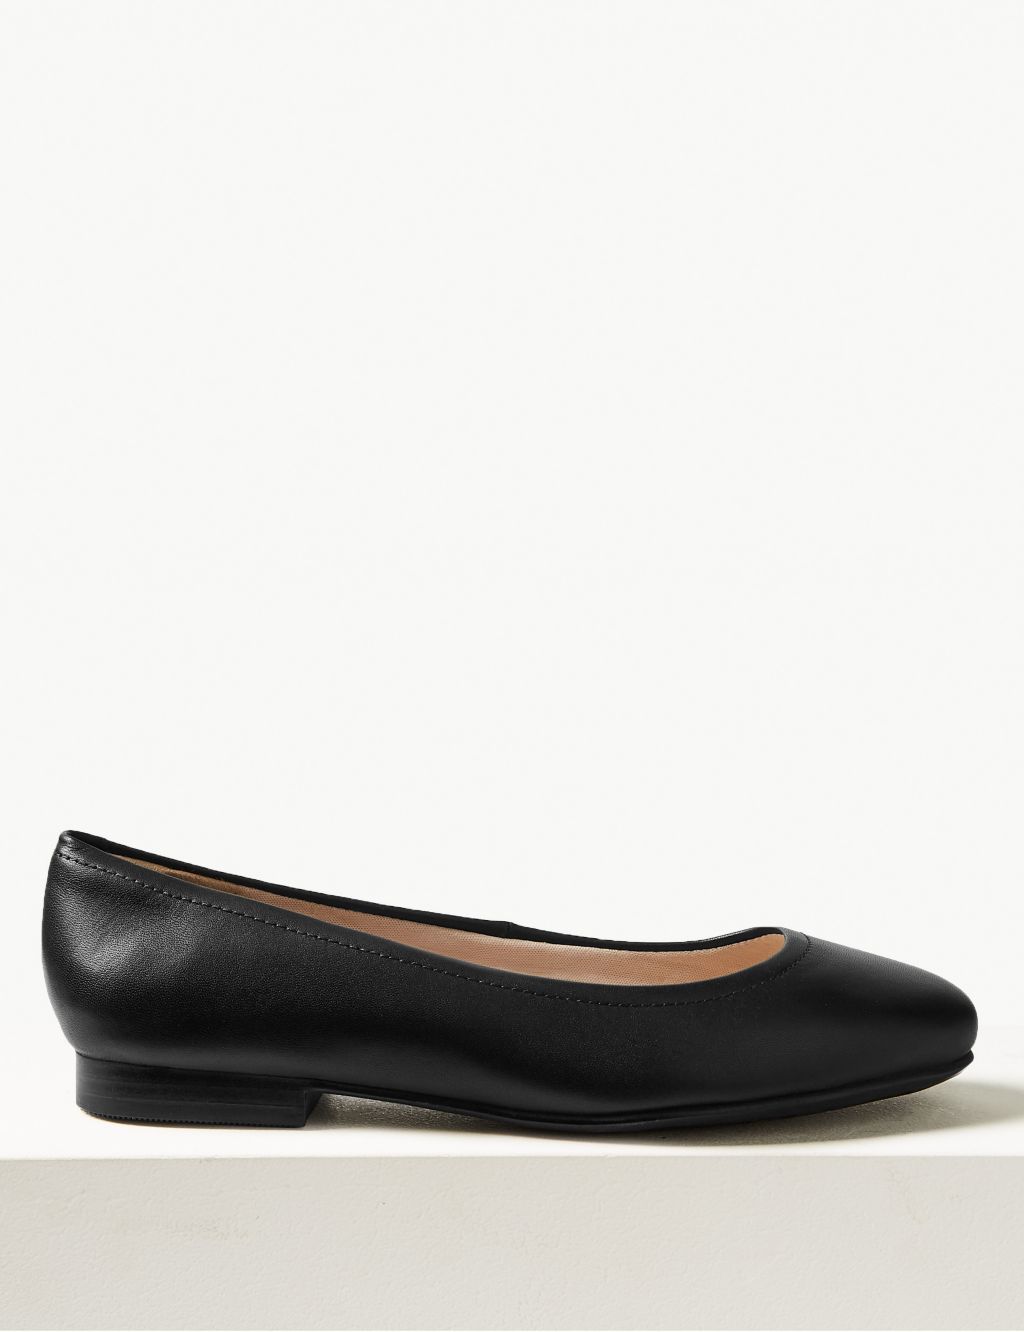 Wide Fit Leather Pumps | M&S Collection | M&S